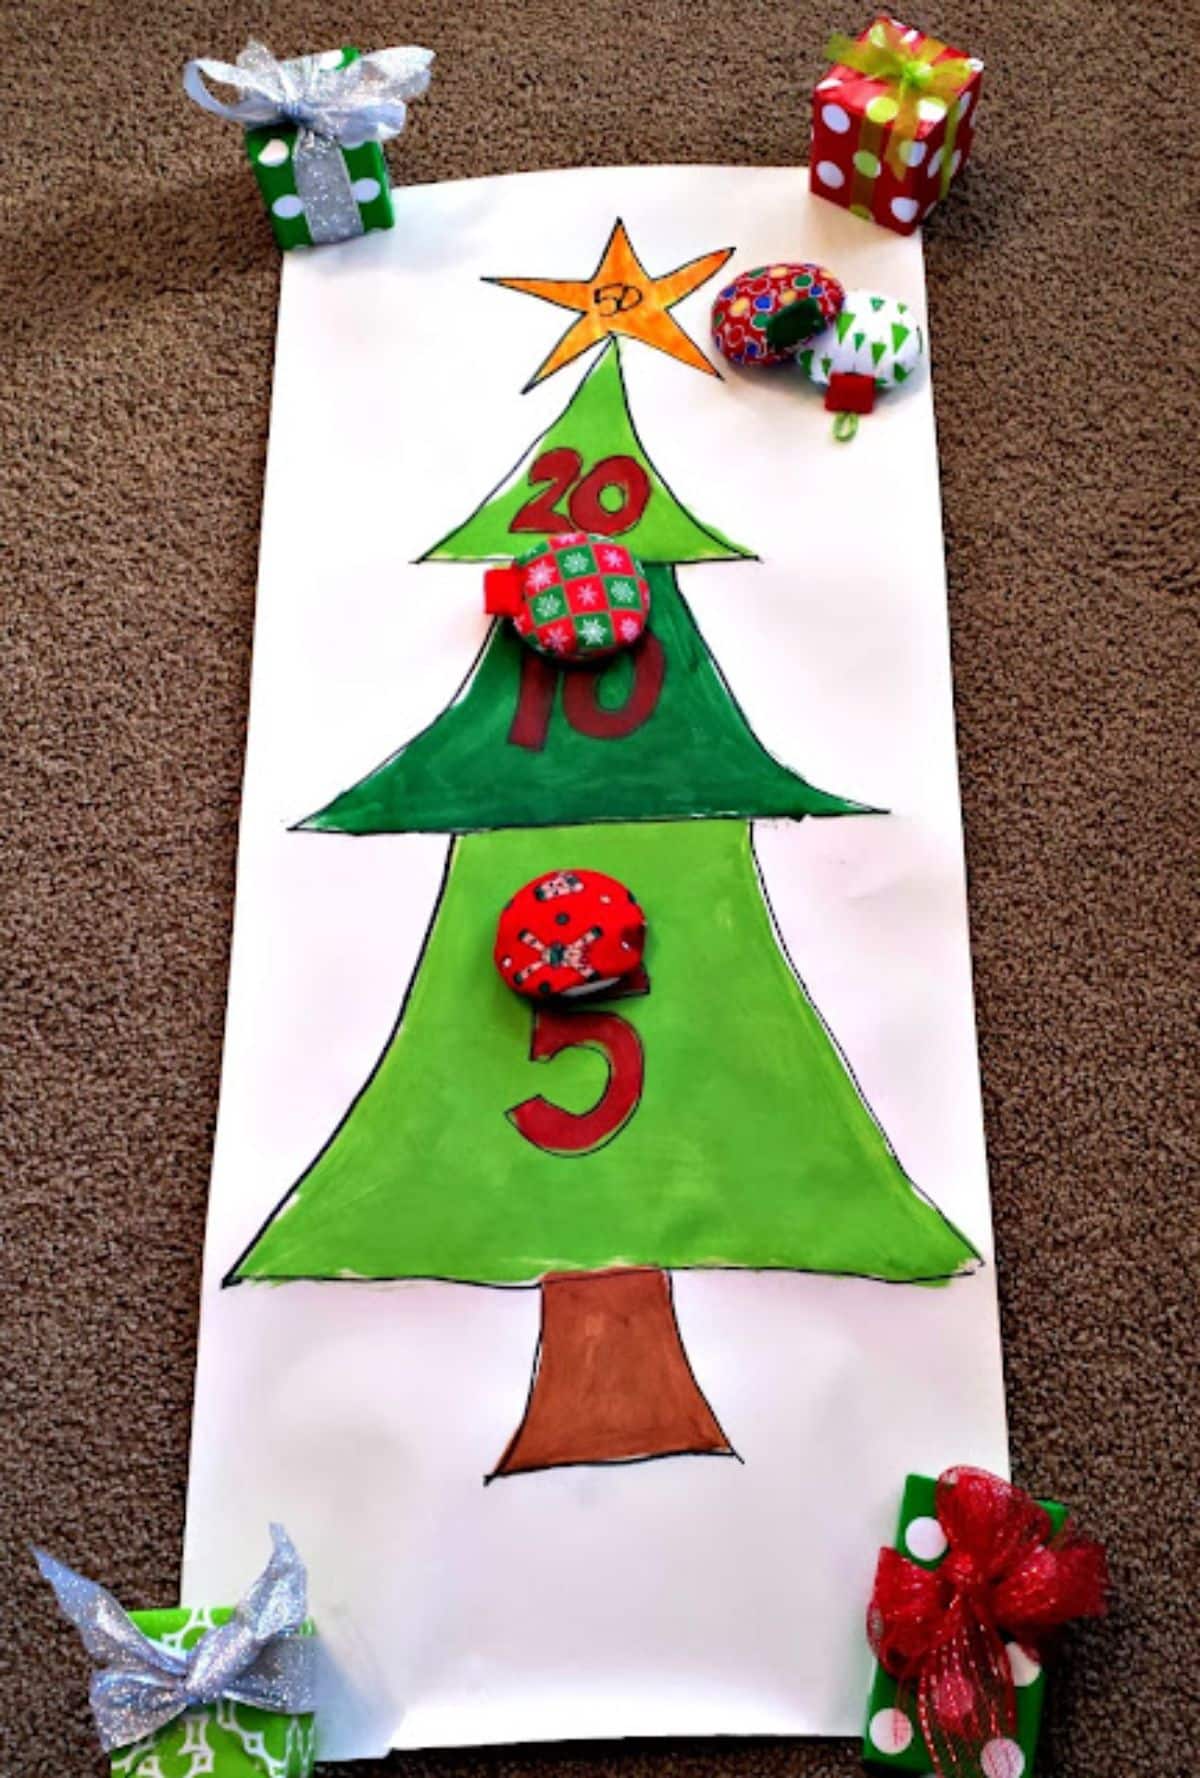 Paper sheet with a drawn chritmas game on a carpet with small christmas gifts.